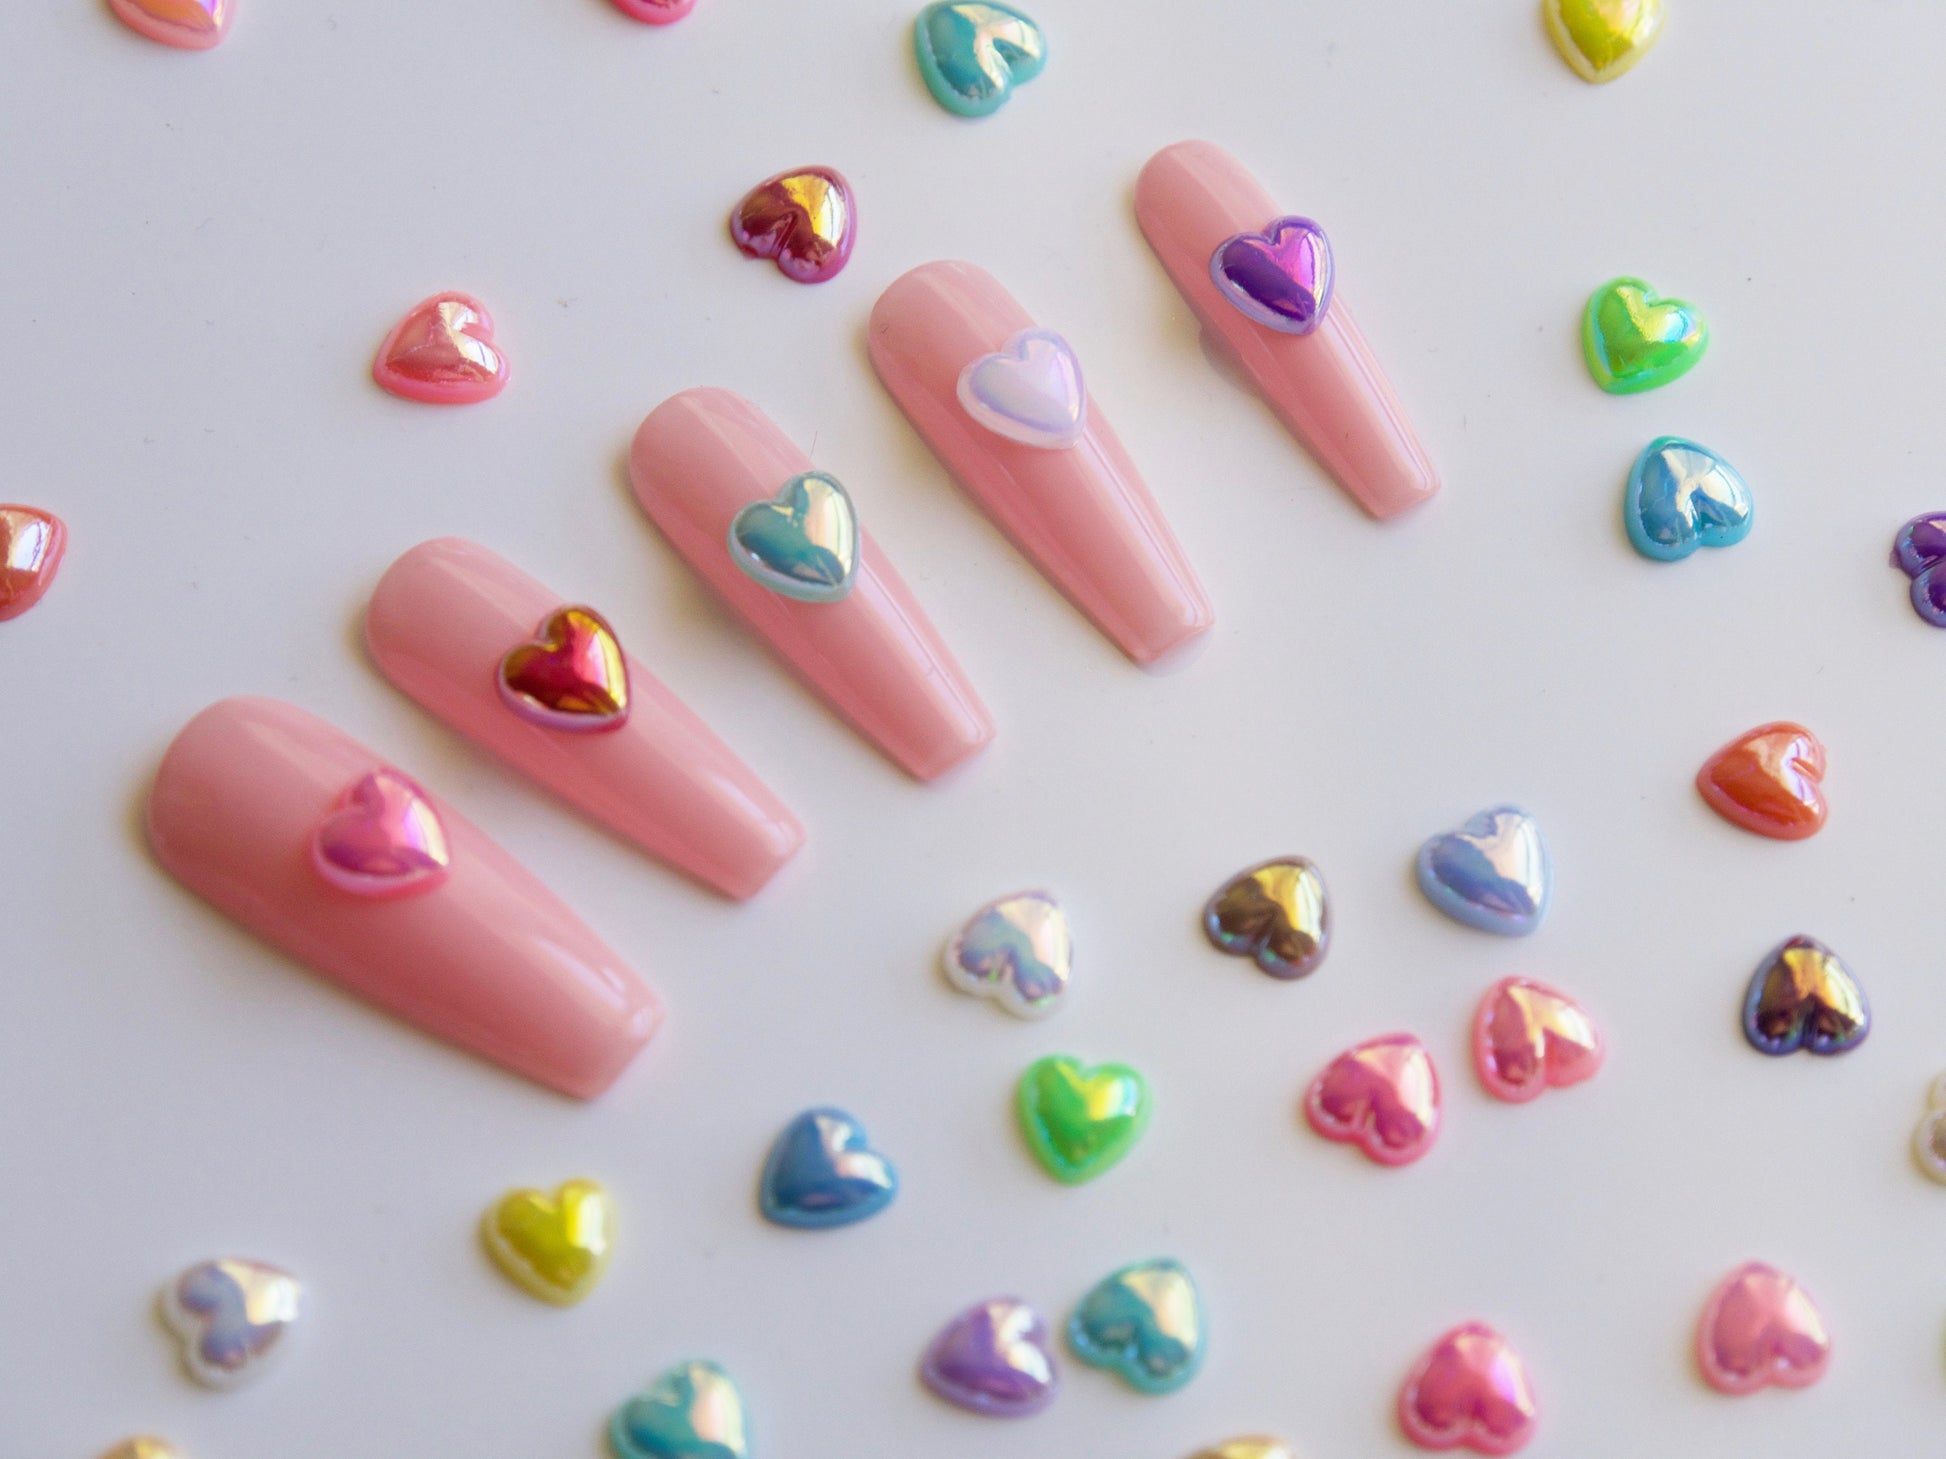 40pcs Iridescent Pearly Heart Shaped Nail Charms Nails Art Decal/ Polar Light 8mm Pearls Nails Decoration Manicure supply